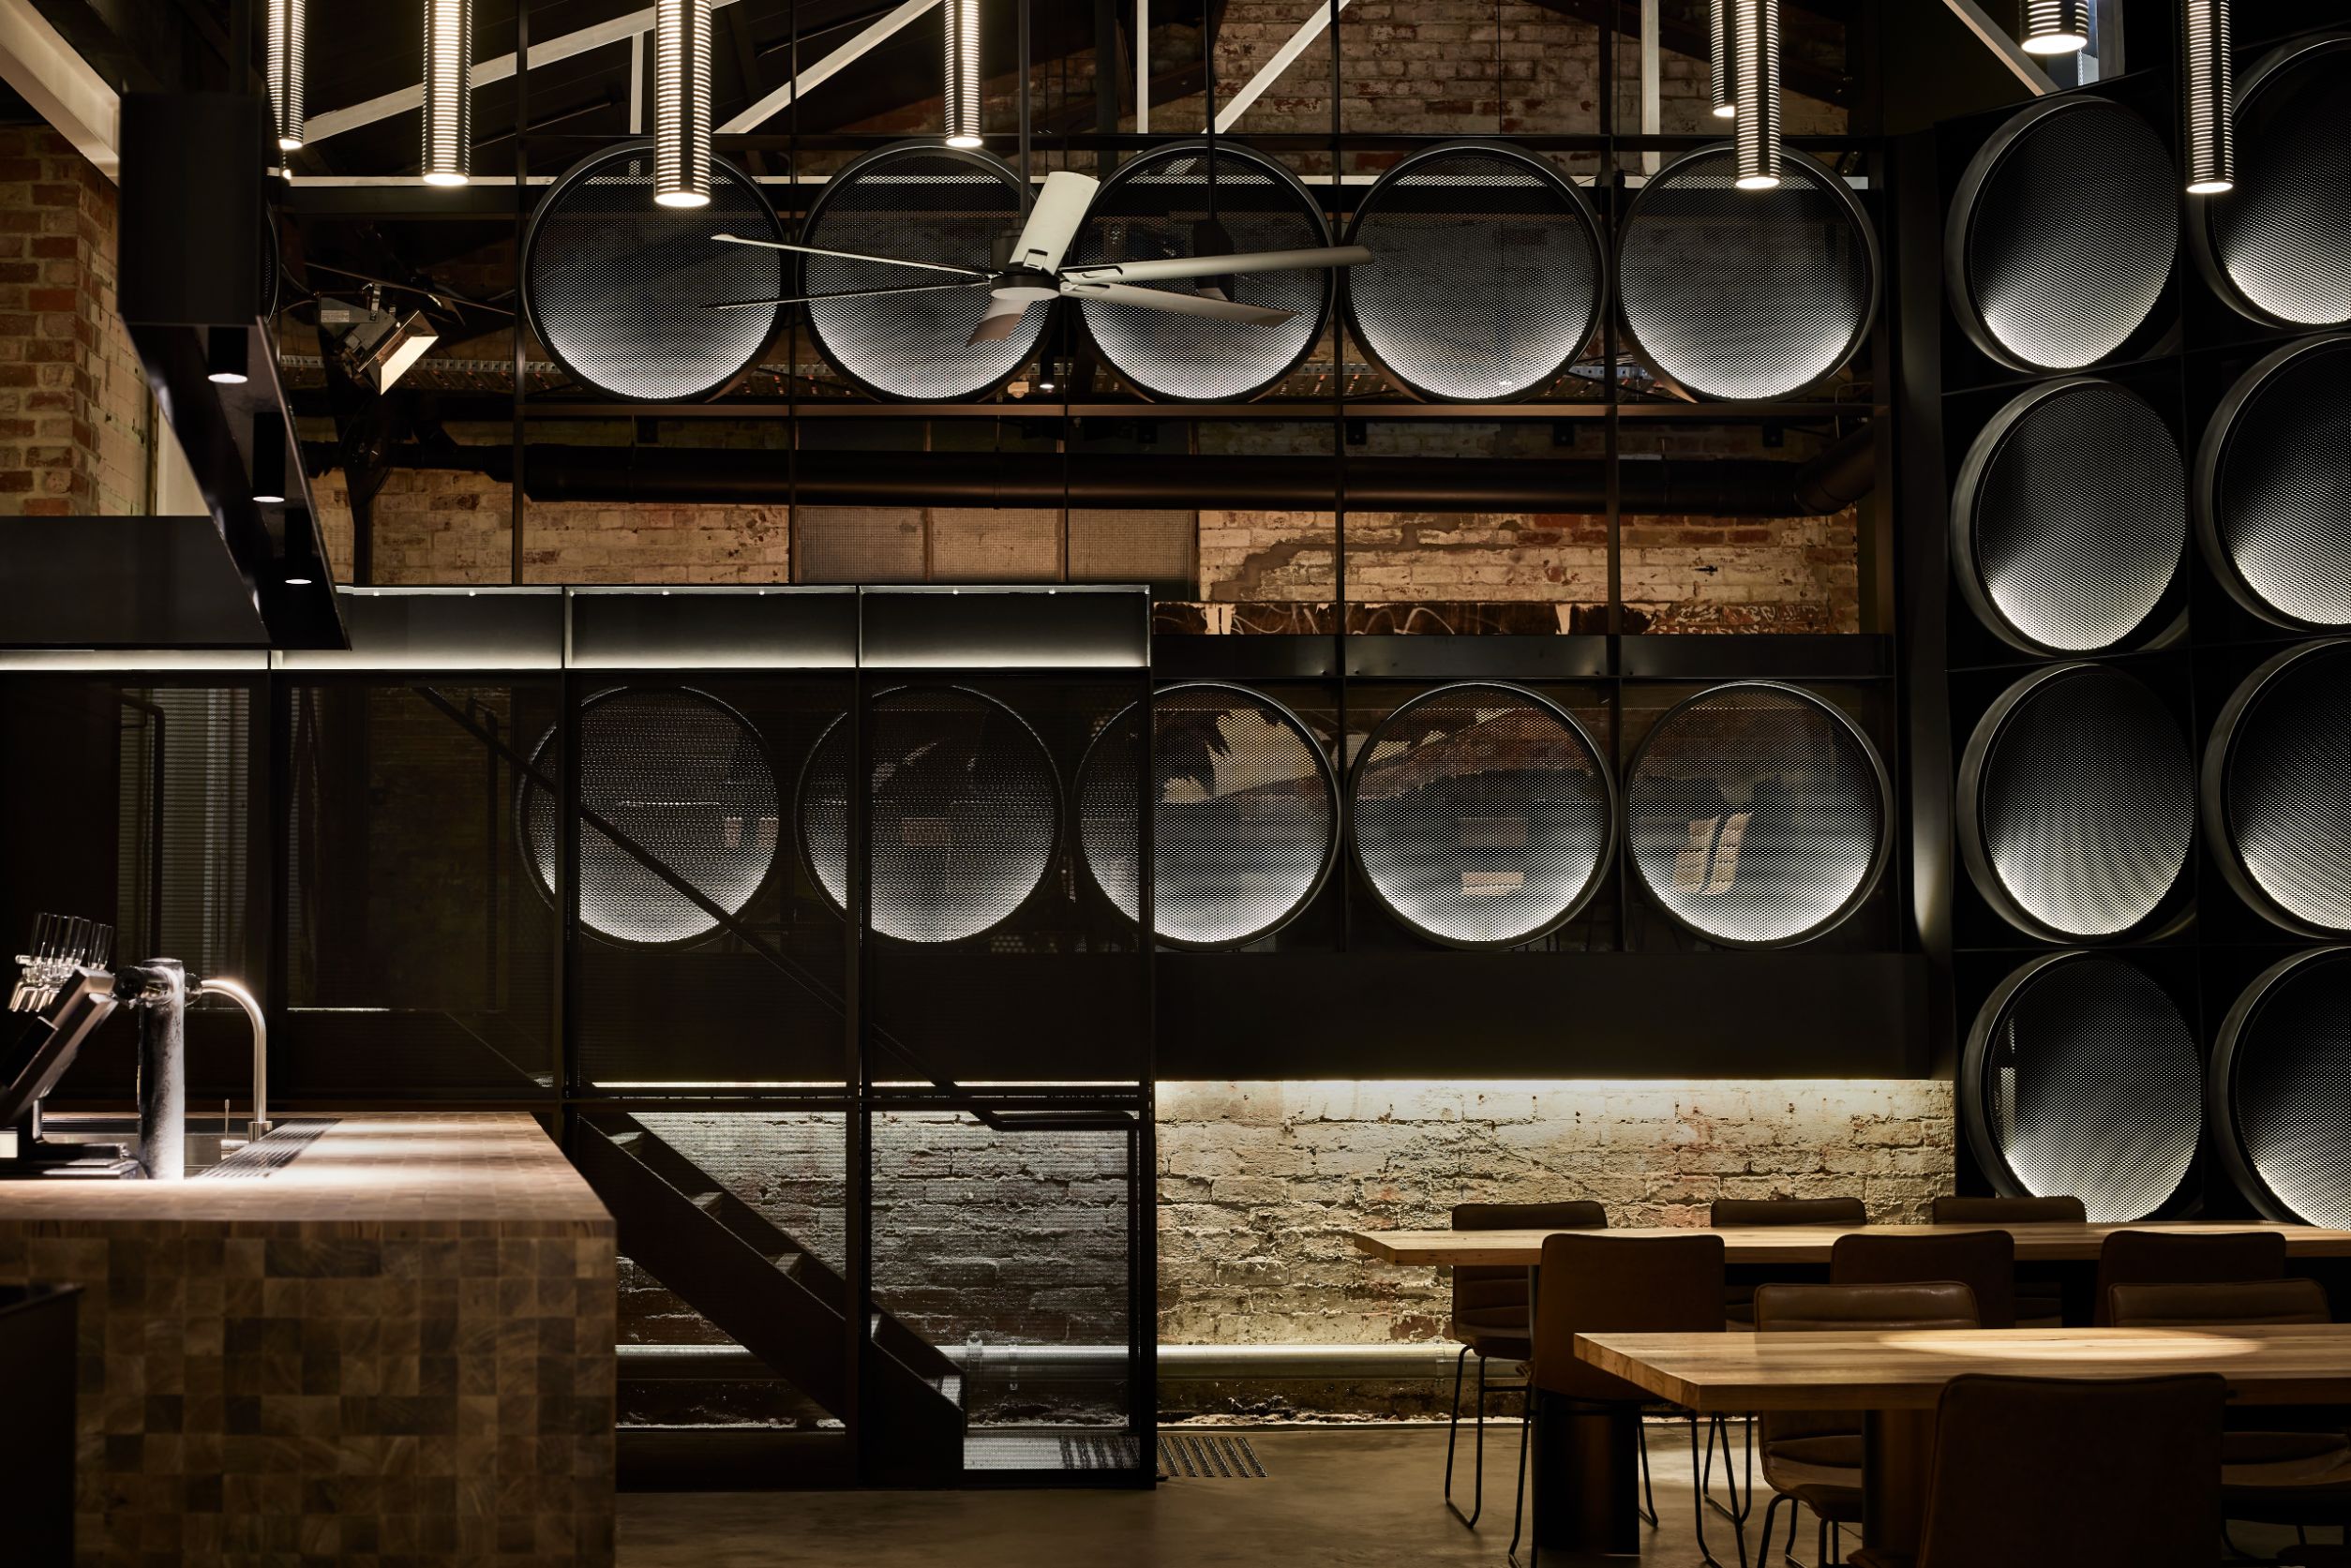 02_Deeds Brewery and Taproom_SplinterSocietyArchitecture_SharynCairns